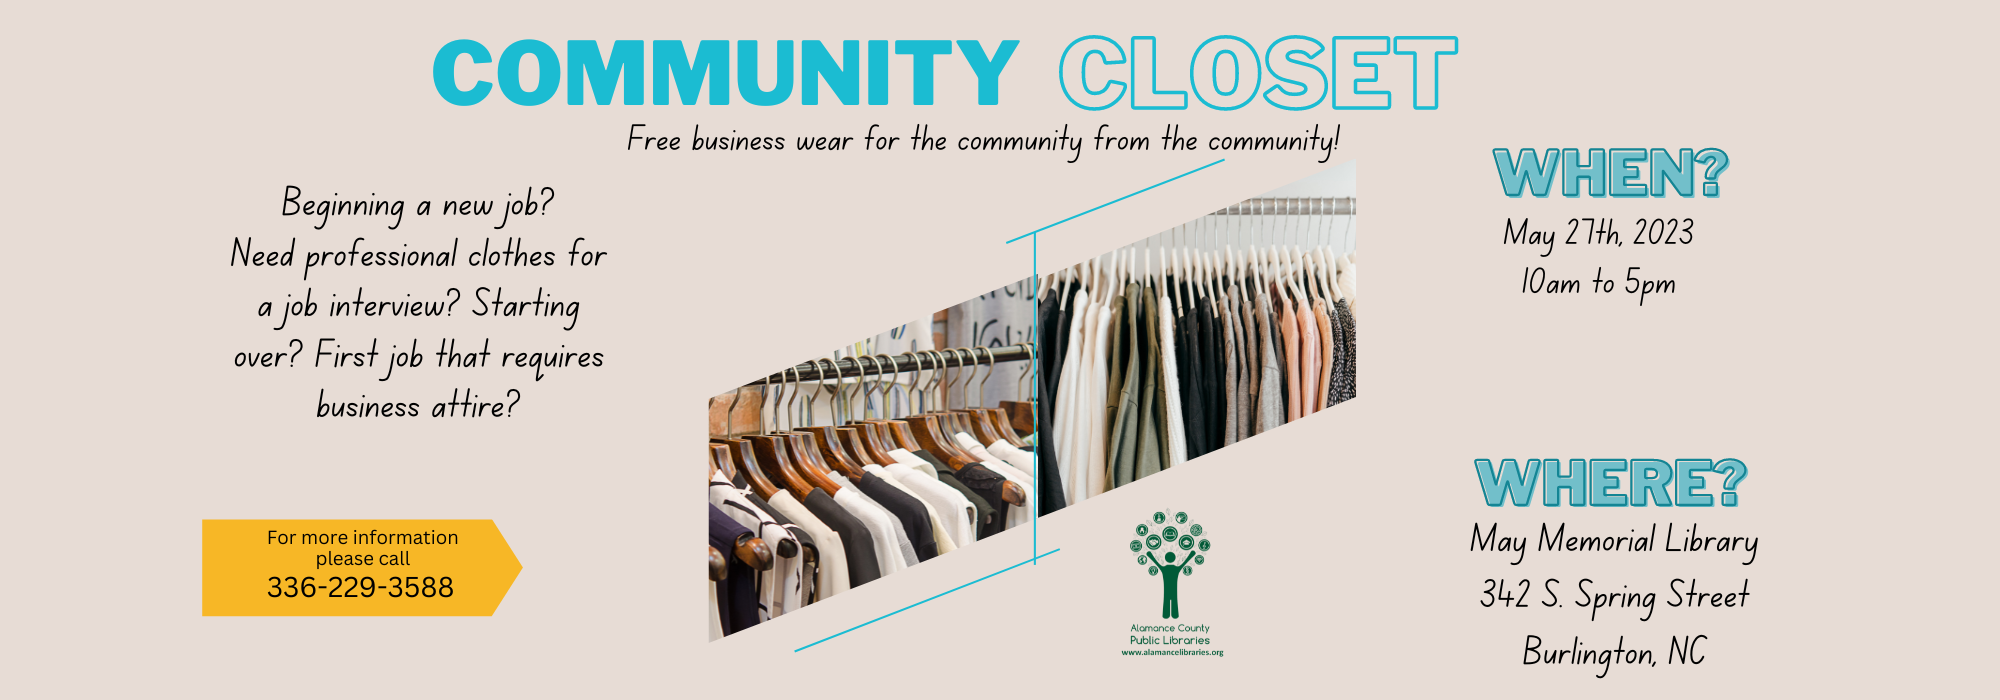 5.27 from 10 am to 5 pm - Community Closet at May Memorial